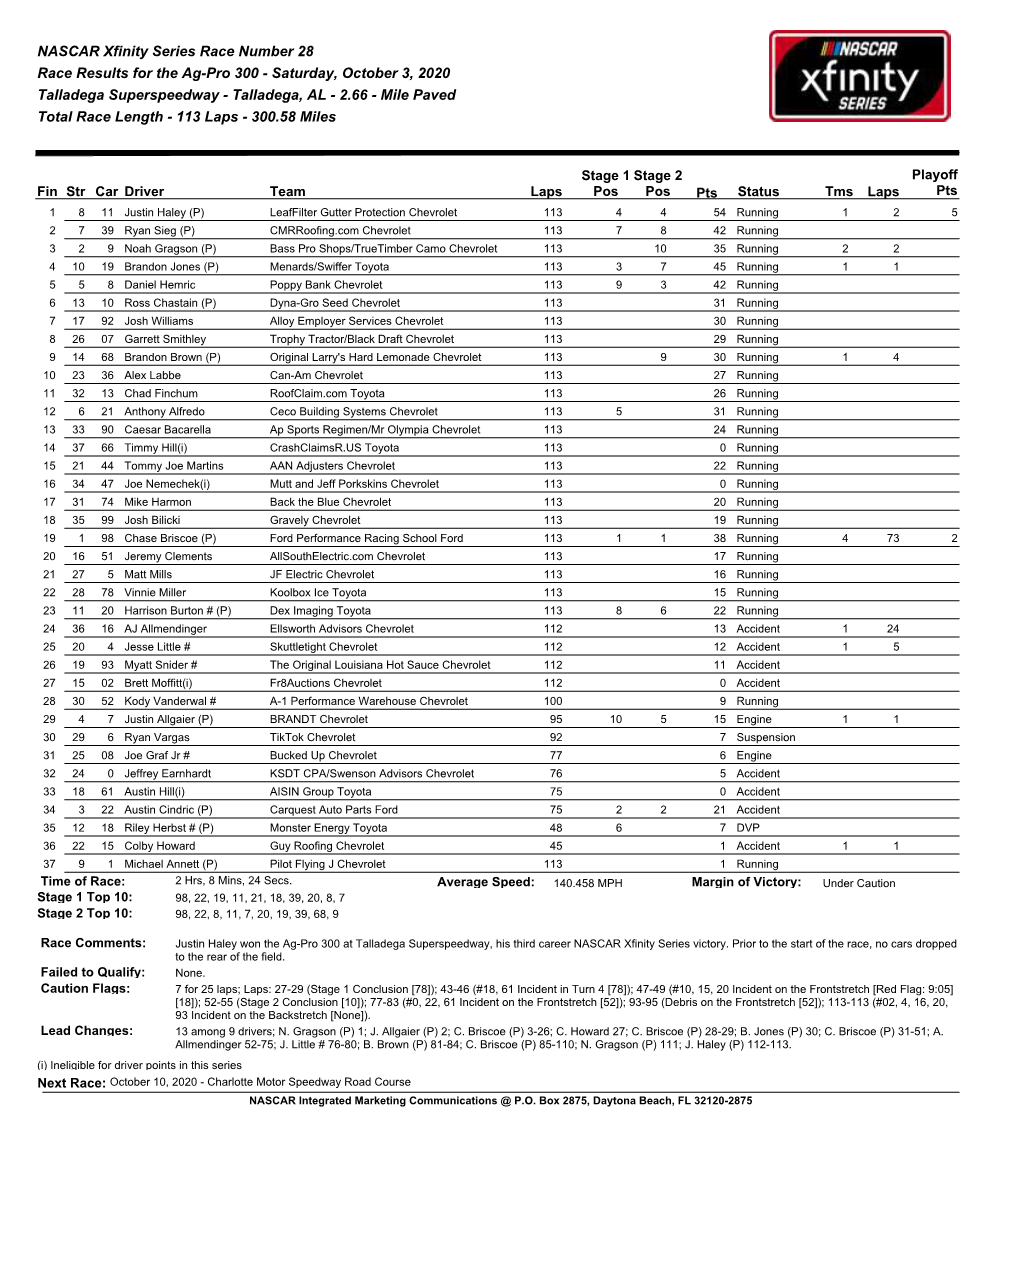 NASCAR Xfinity Series Race Number 28 Race Results for the Ag-Pro 300